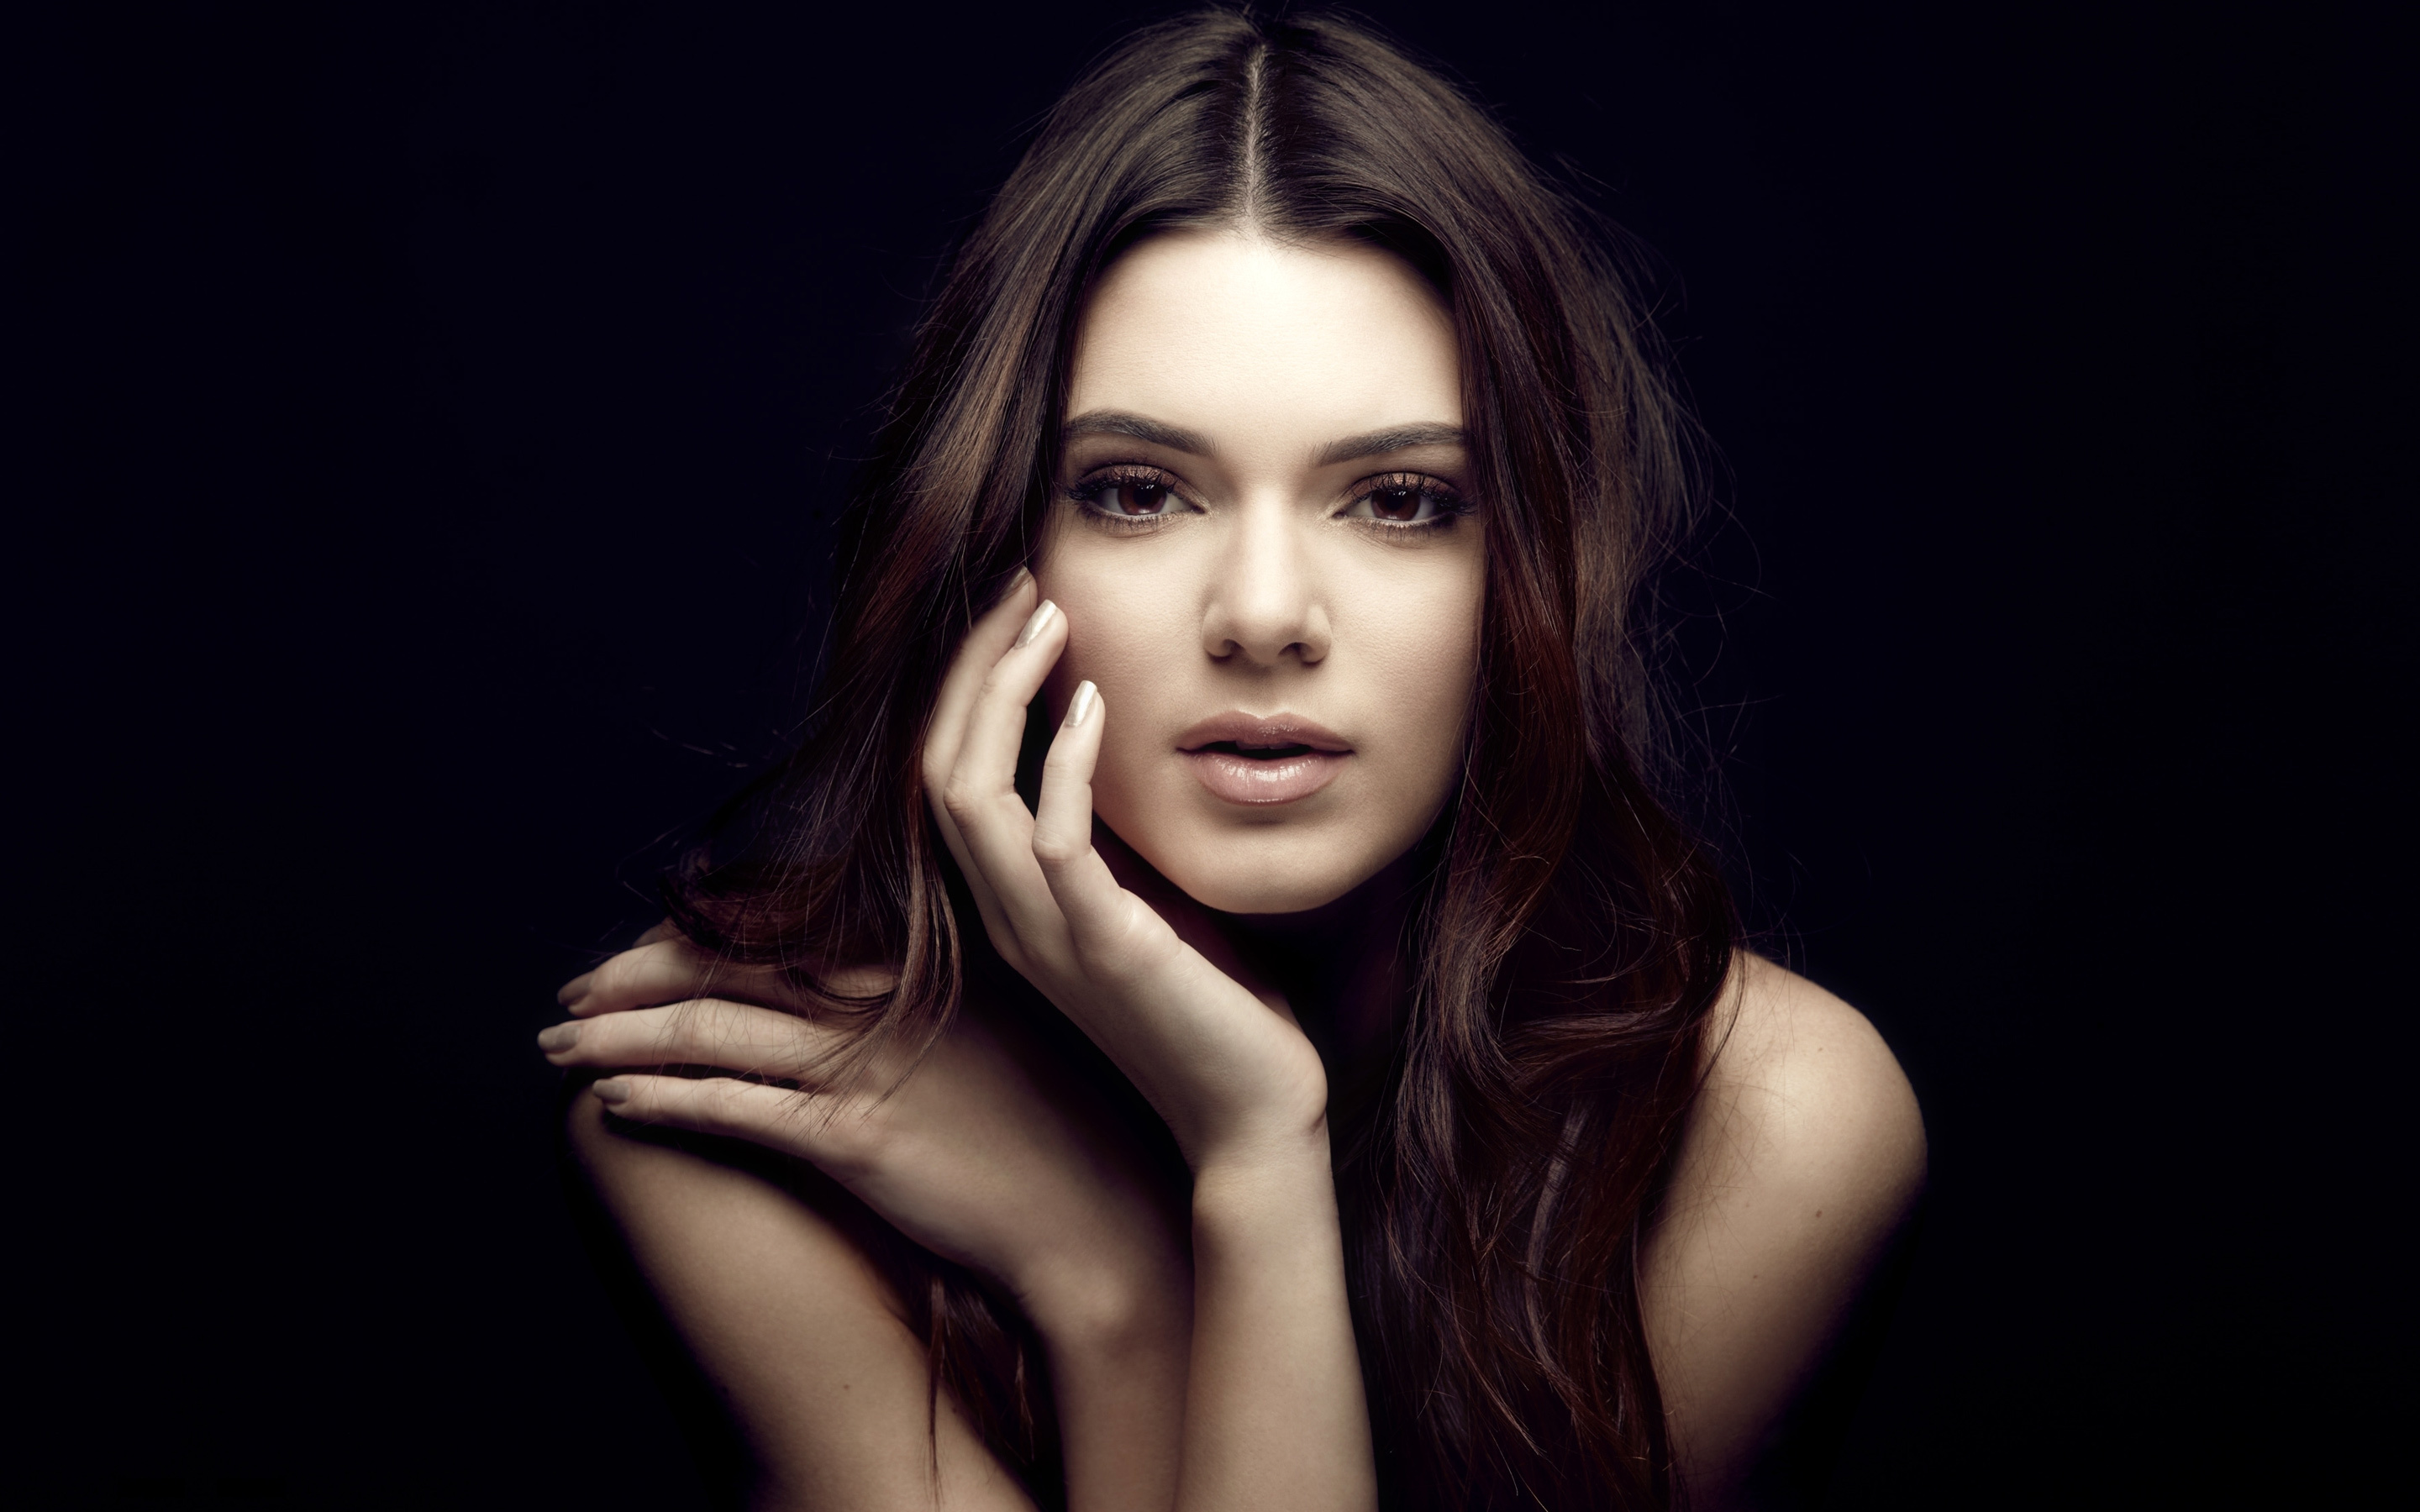 Fashion: Kendall Jenner, working in commercial print ad campaigns and photoshoots. 2880x1800 HD Background.